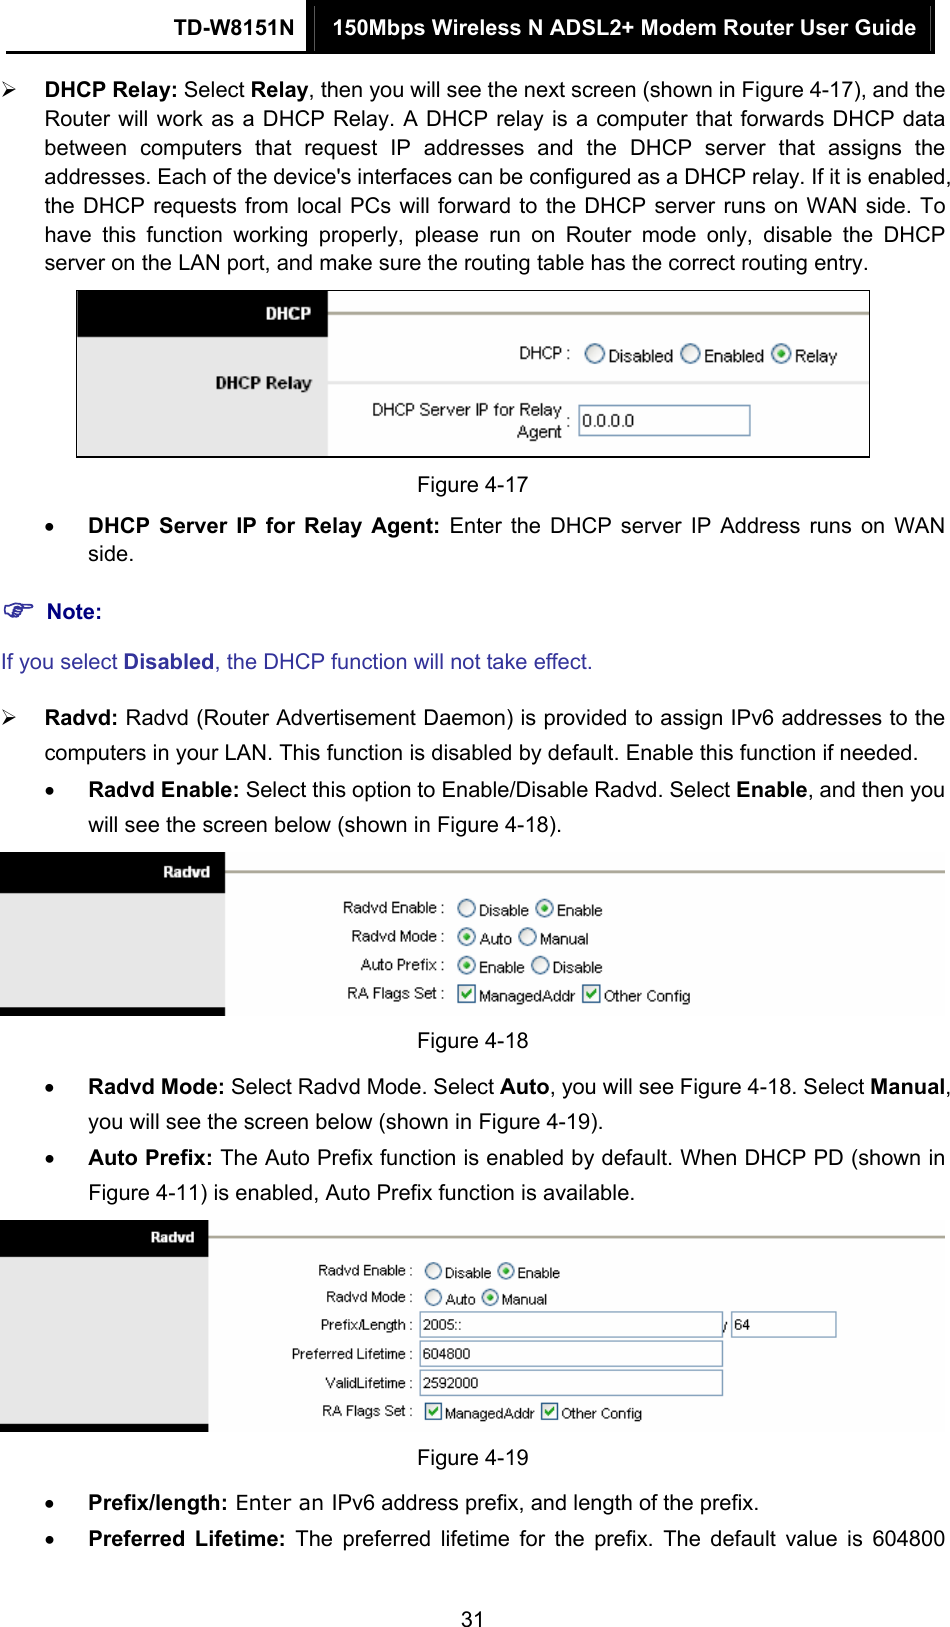 TD-W8151N  150Mbps Wireless N ADSL2+ Modem Router User Guide  31 DHCP Relay: Select Relay, then you will see the next screen (shown in Figure 4-17), and the Router will work as a DHCP Relay. A DHCP relay is a computer that forwards DHCP data between computers that request IP addresses and the DHCP server that assigns the addresses. Each of the device&apos;s interfaces can be configured as a DHCP relay. If it is enabled, the DHCP requests from local PCs will forward to the DHCP server runs on WAN side. To have this function working properly, please run on Router mode only, disable the DHCP server on the LAN port, and make sure the routing table has the correct routing entry.  Figure 4-17  DHCP Server IP for Relay Agent: Enter the DHCP server IP Address runs on WAN side.  Note: If you select Disabled, the DHCP function will not take effect.    Radvd: Radvd (Router Advertisement Daemon) is provided to assign IPv6 addresses to the               computers in your LAN. This function is disabled by default. Enable this function if needed.  Radvd Enable: Select this option to Enable/Disable Radvd. Select Enable, and then you will see the screen below (shown in Figure 4-18).  Figure 4-18  Radvd Mode: Select Radvd Mode. Select Auto, you will see Figure 4-18. Select Manual, you will see the screen below (shown in Figure 4-19).  Auto Prefix: The Auto Prefix function is enabled by default. When DHCP PD (shown in Figure 4-11) is enabled, Auto Prefix function is available.  Figure 4-19  Prefix/length: Enter an IPv6 address prefix, and length of the prefix.  Preferred Lifetime: The preferred lifetime for the prefix. The default value is 604800 